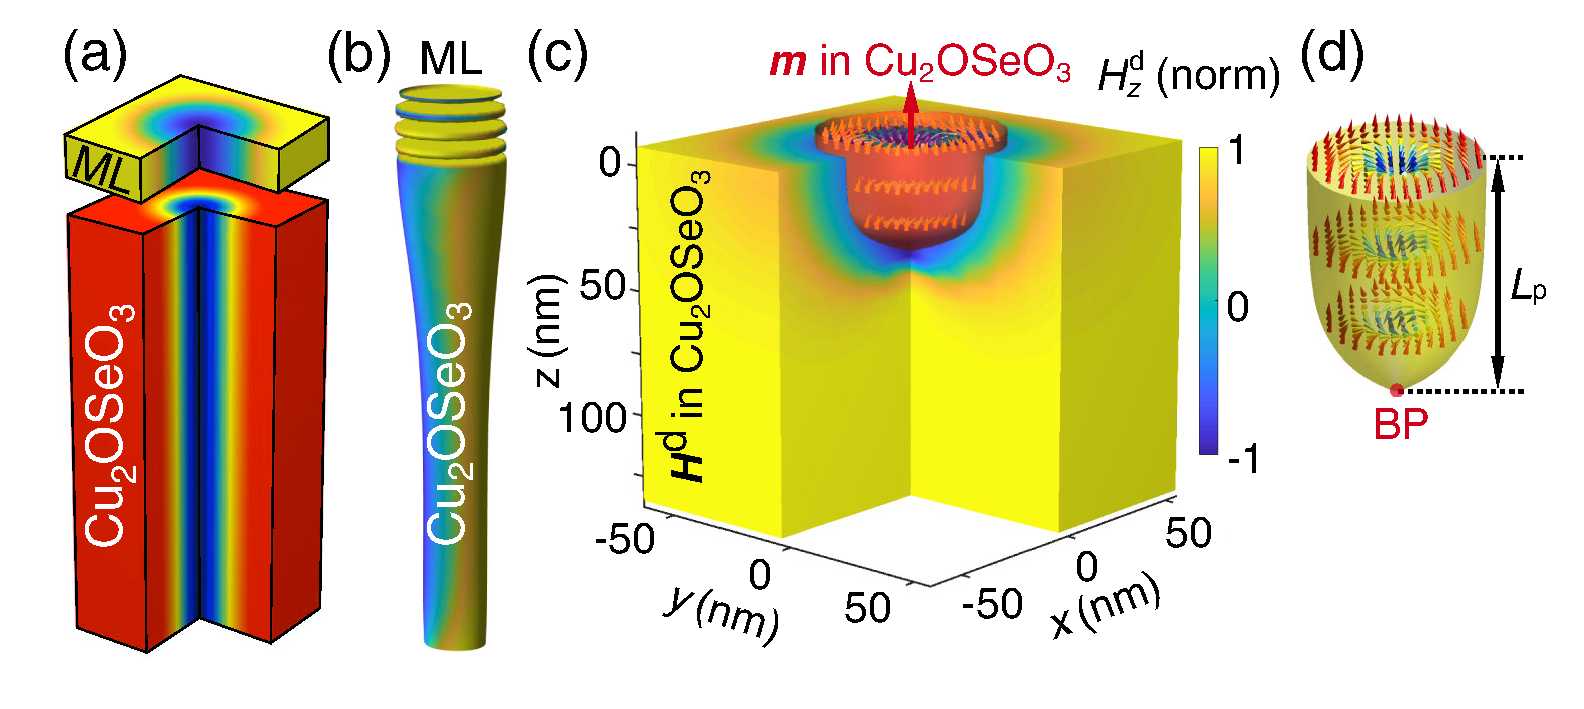 K. Ran, Y. Liu, Y. Guang, D. M. Burn, G. van der Laan, T. Hesjedal, H. Du, G. Yu, S. Zhang, Creation of a Chiral Bobber Lattice in Helimagnet-Multilayer Heterostructures, Physical Review Letters 126, 017204 (2021).